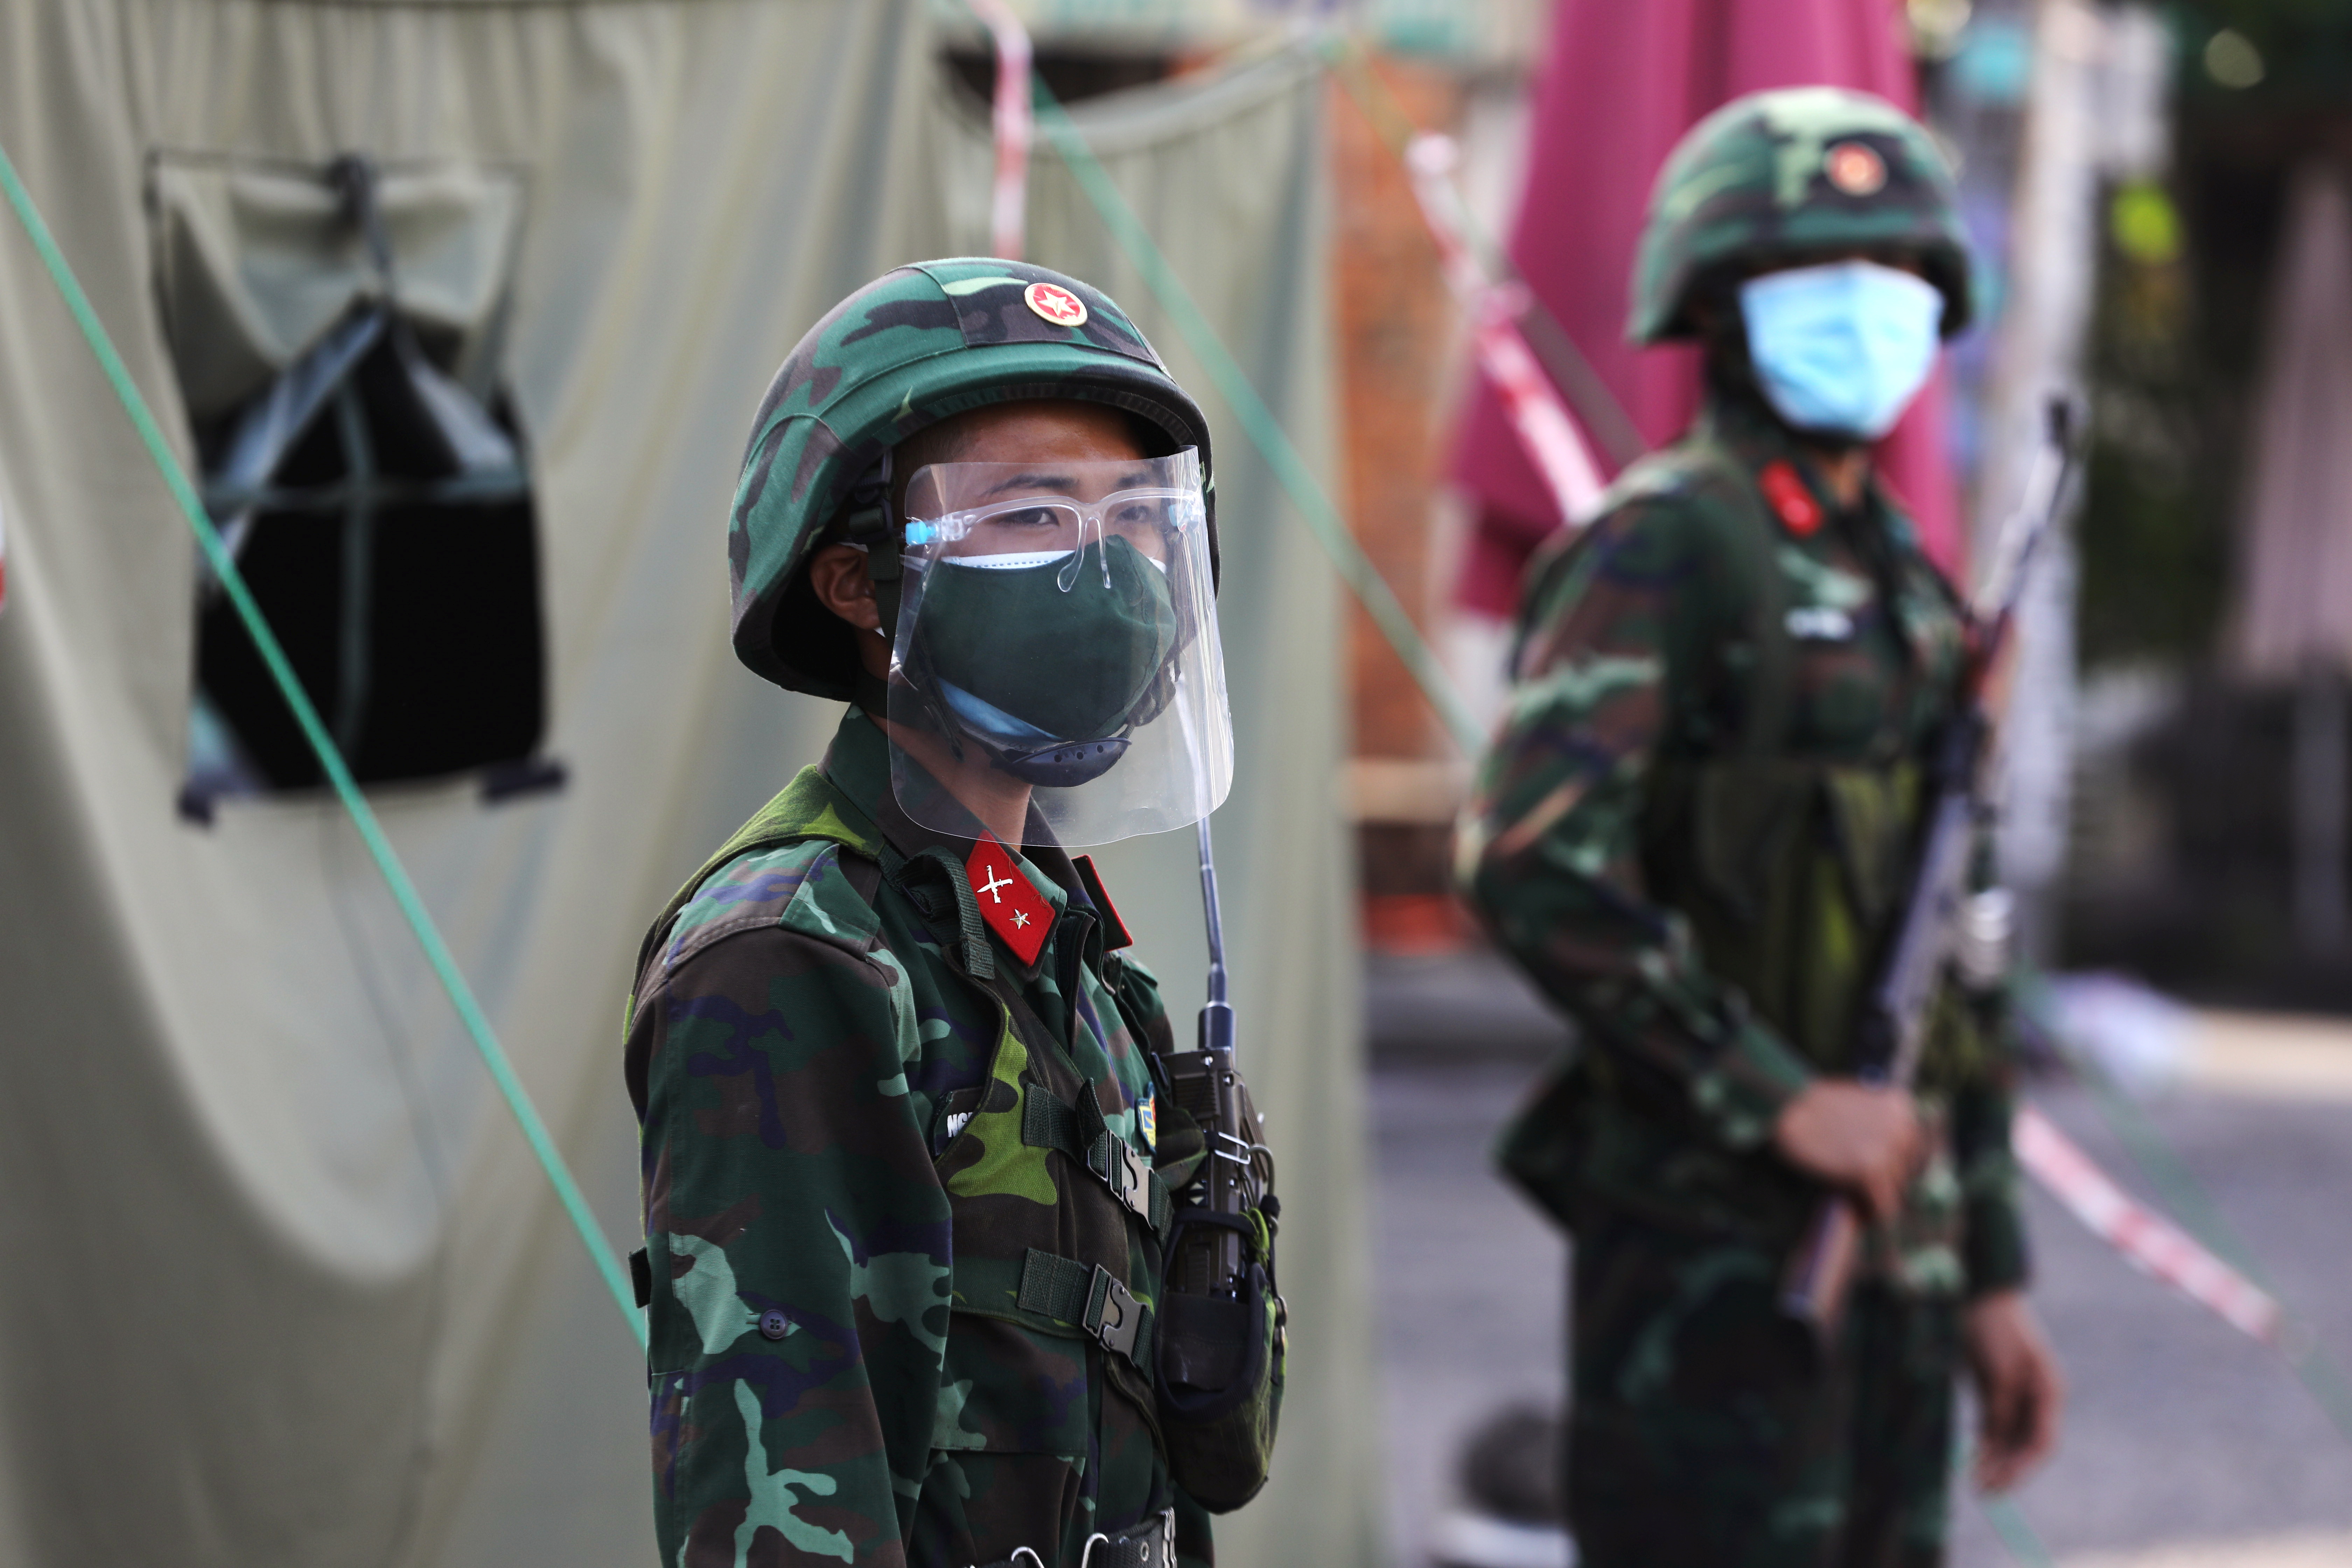 A military check point is seen during lockdown amid the coronavirus disease pandemic in Ho Chi Minh, Vietnam